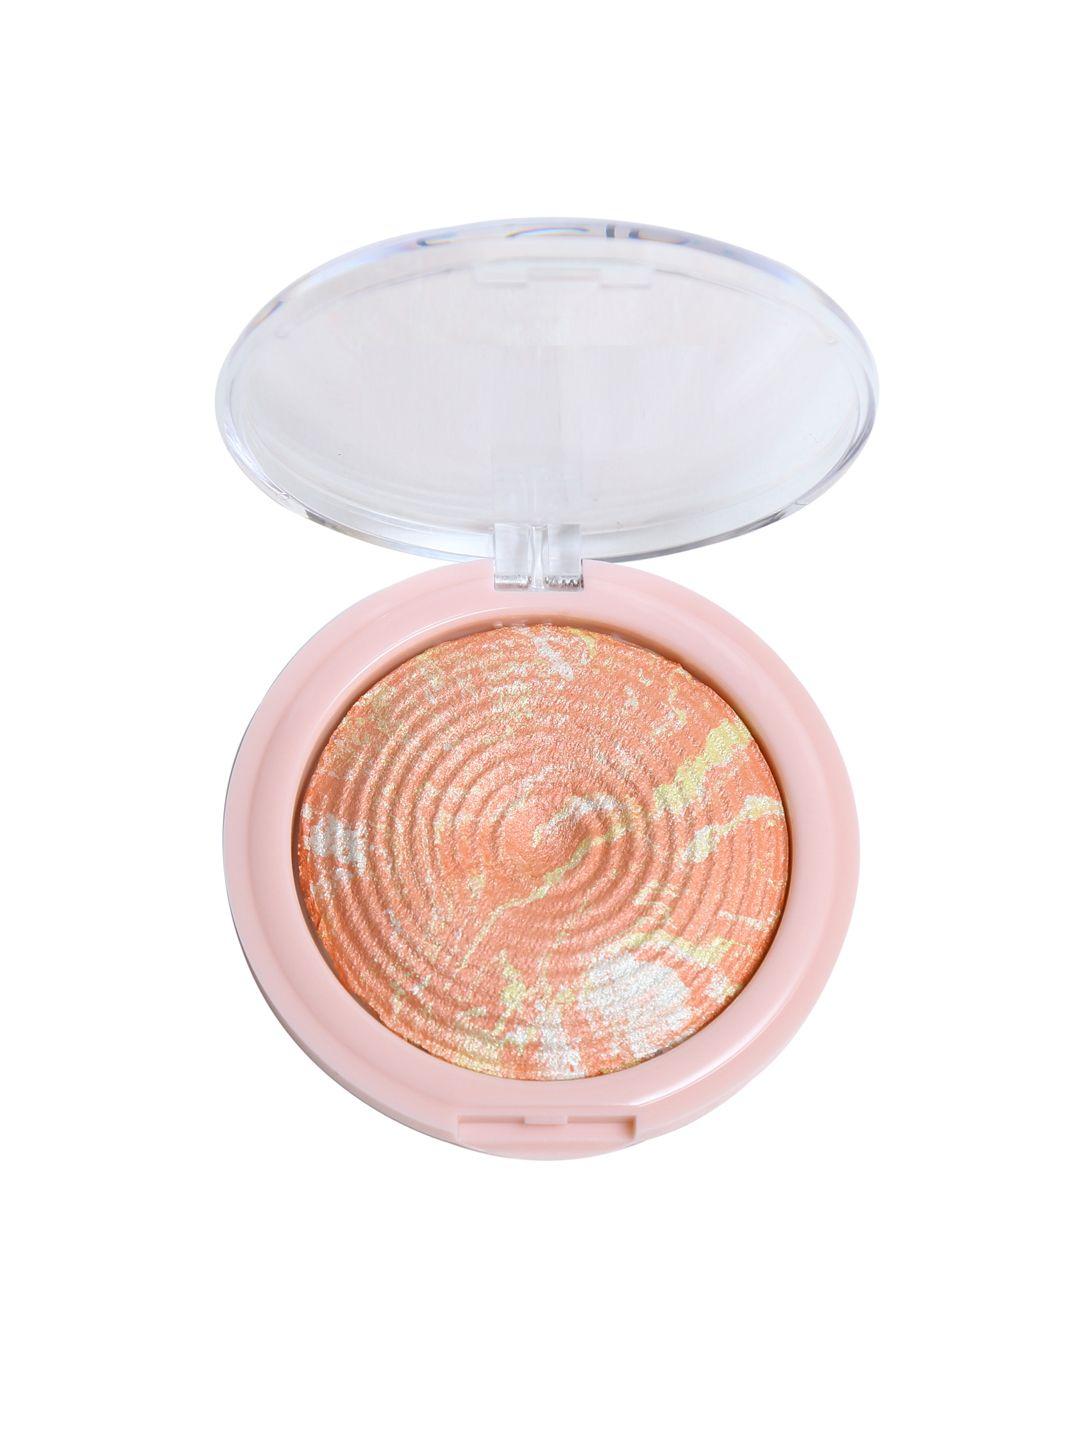 miss-claire-02-baked-blusher-8g